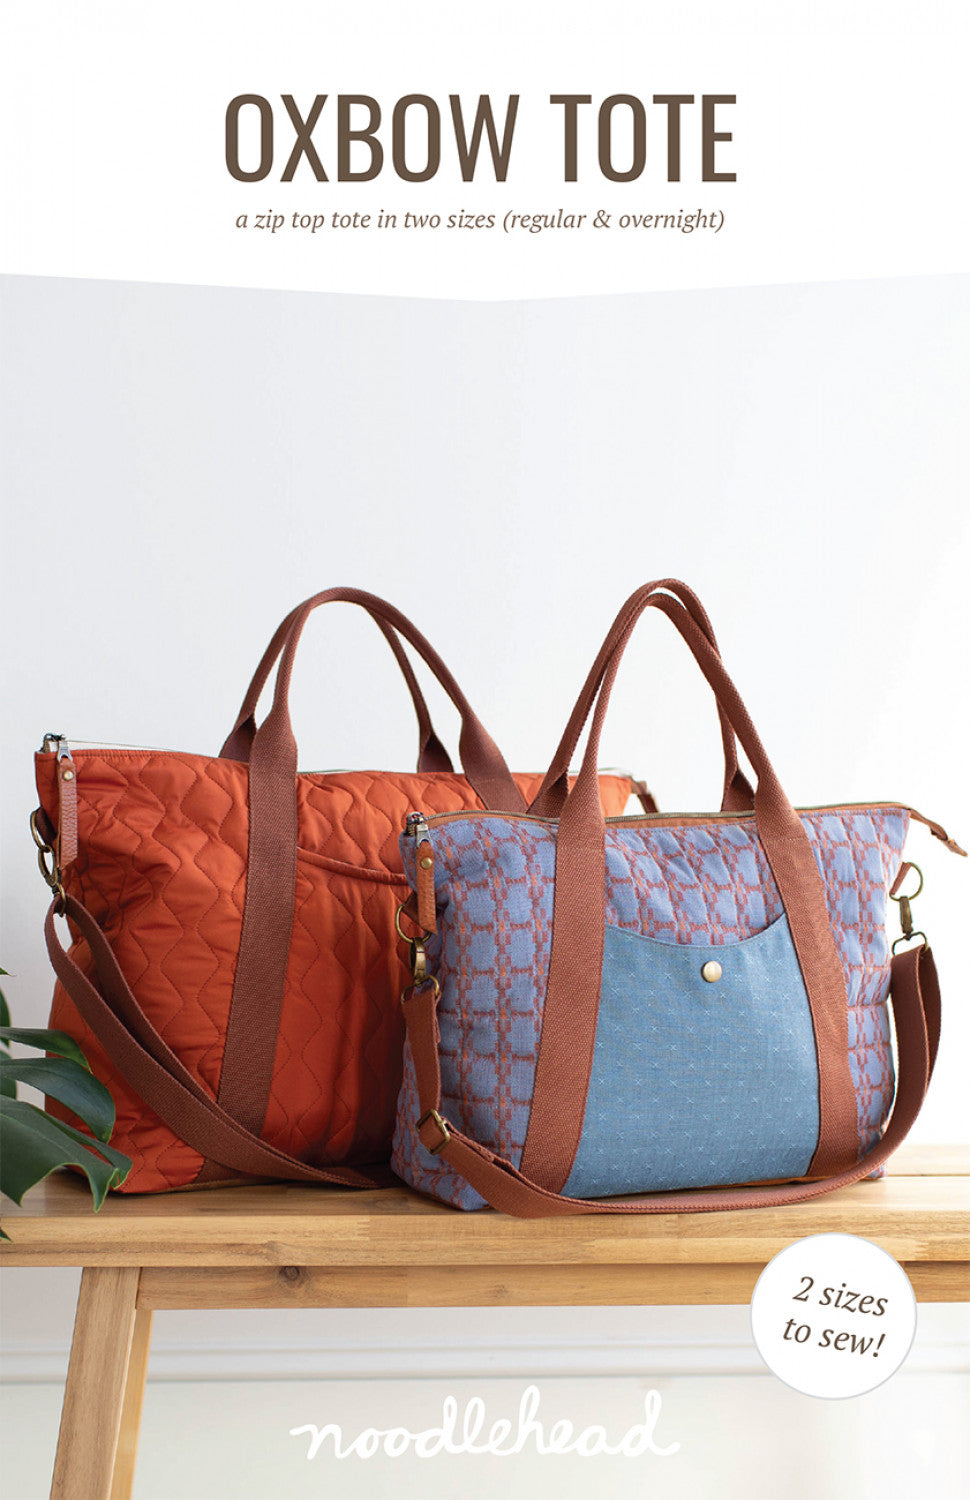 Oxbow Tote Bag Sewing Pattern by Anna Graham for Noodlehead